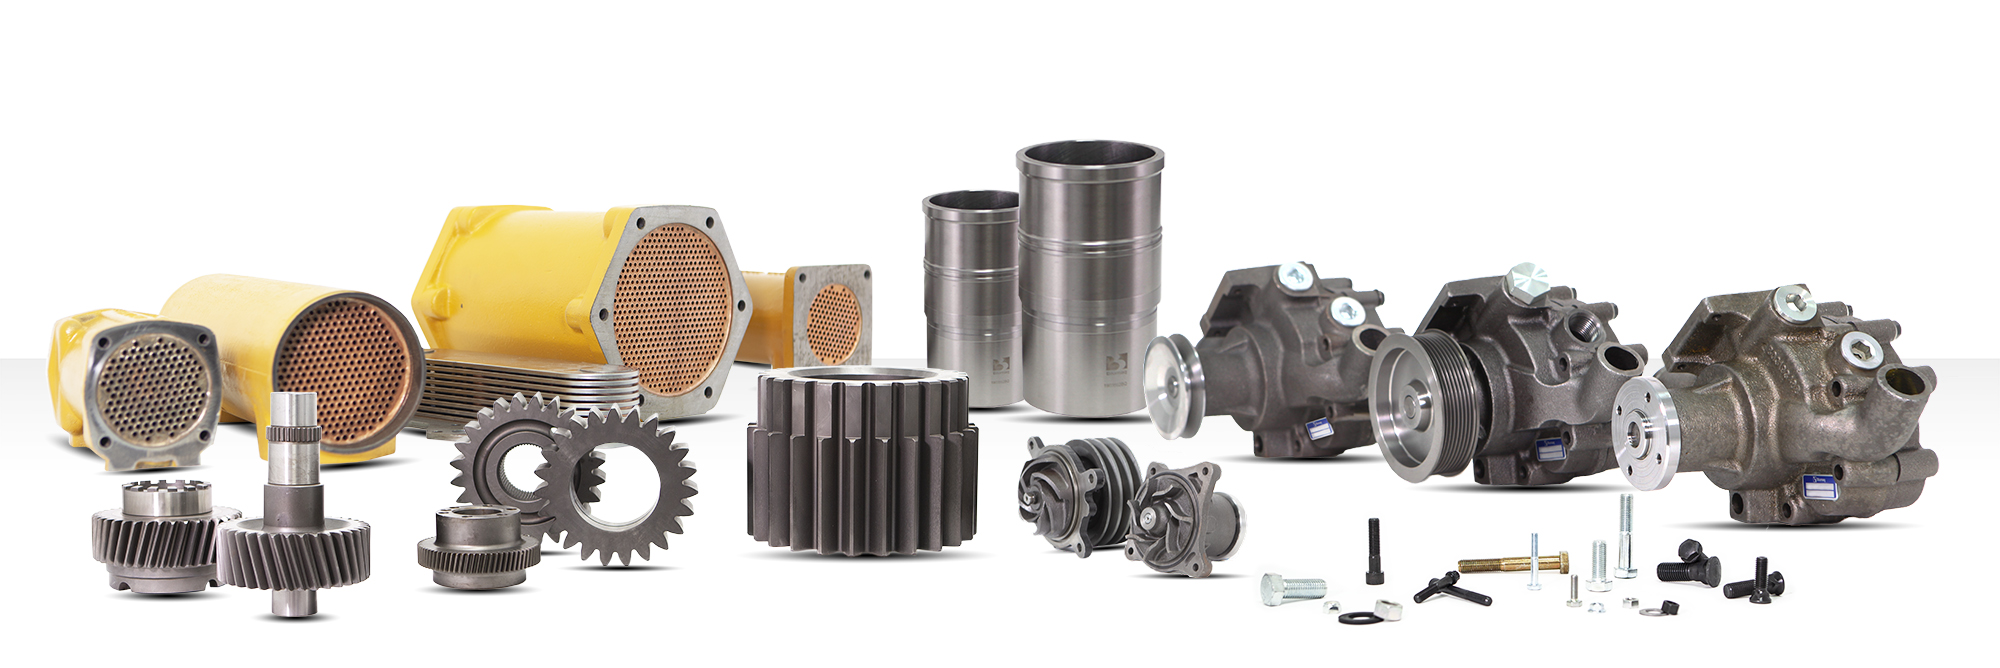 Case parts for machinery of public works, mining, marine engines, tractors.